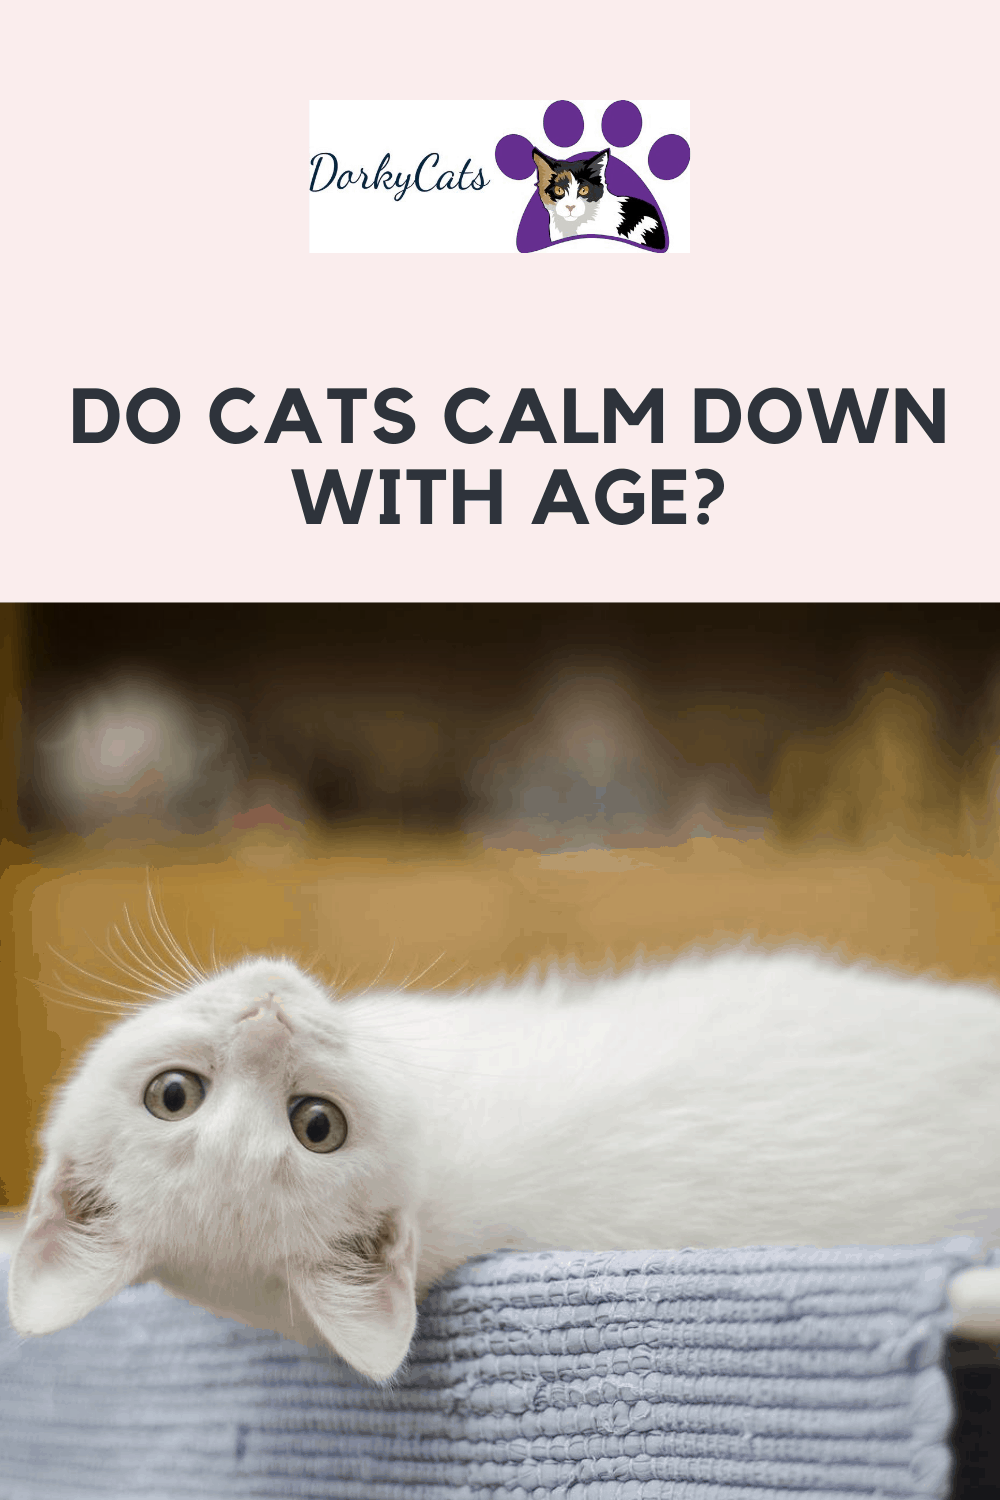 DO CATS CALM DOWN WITH AGE? Dorkycats